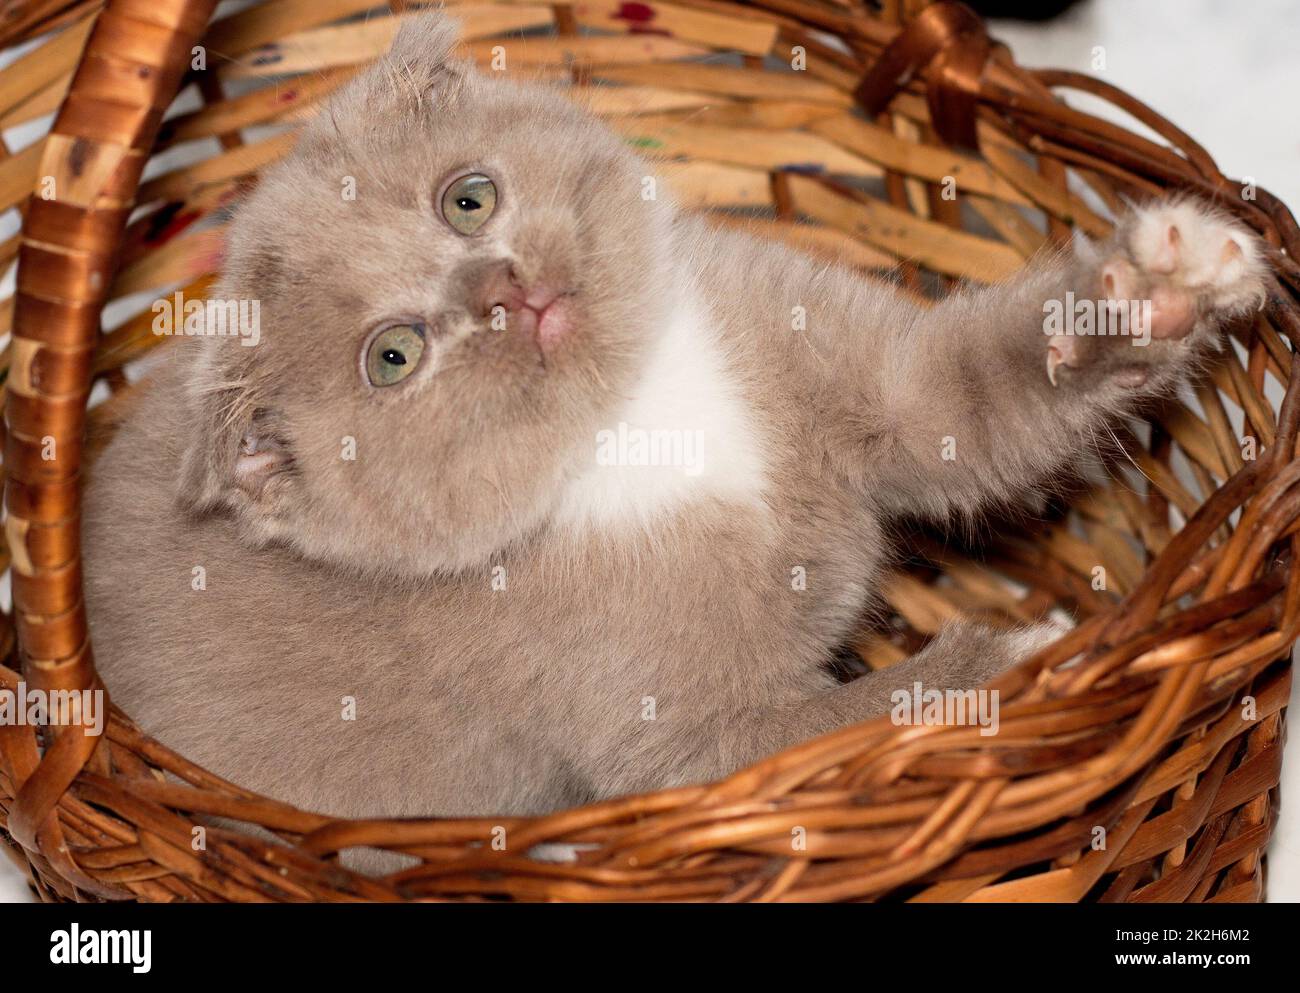 close-up Scottish fold bicolor lilac kitten in a wicker basket Stock Photo